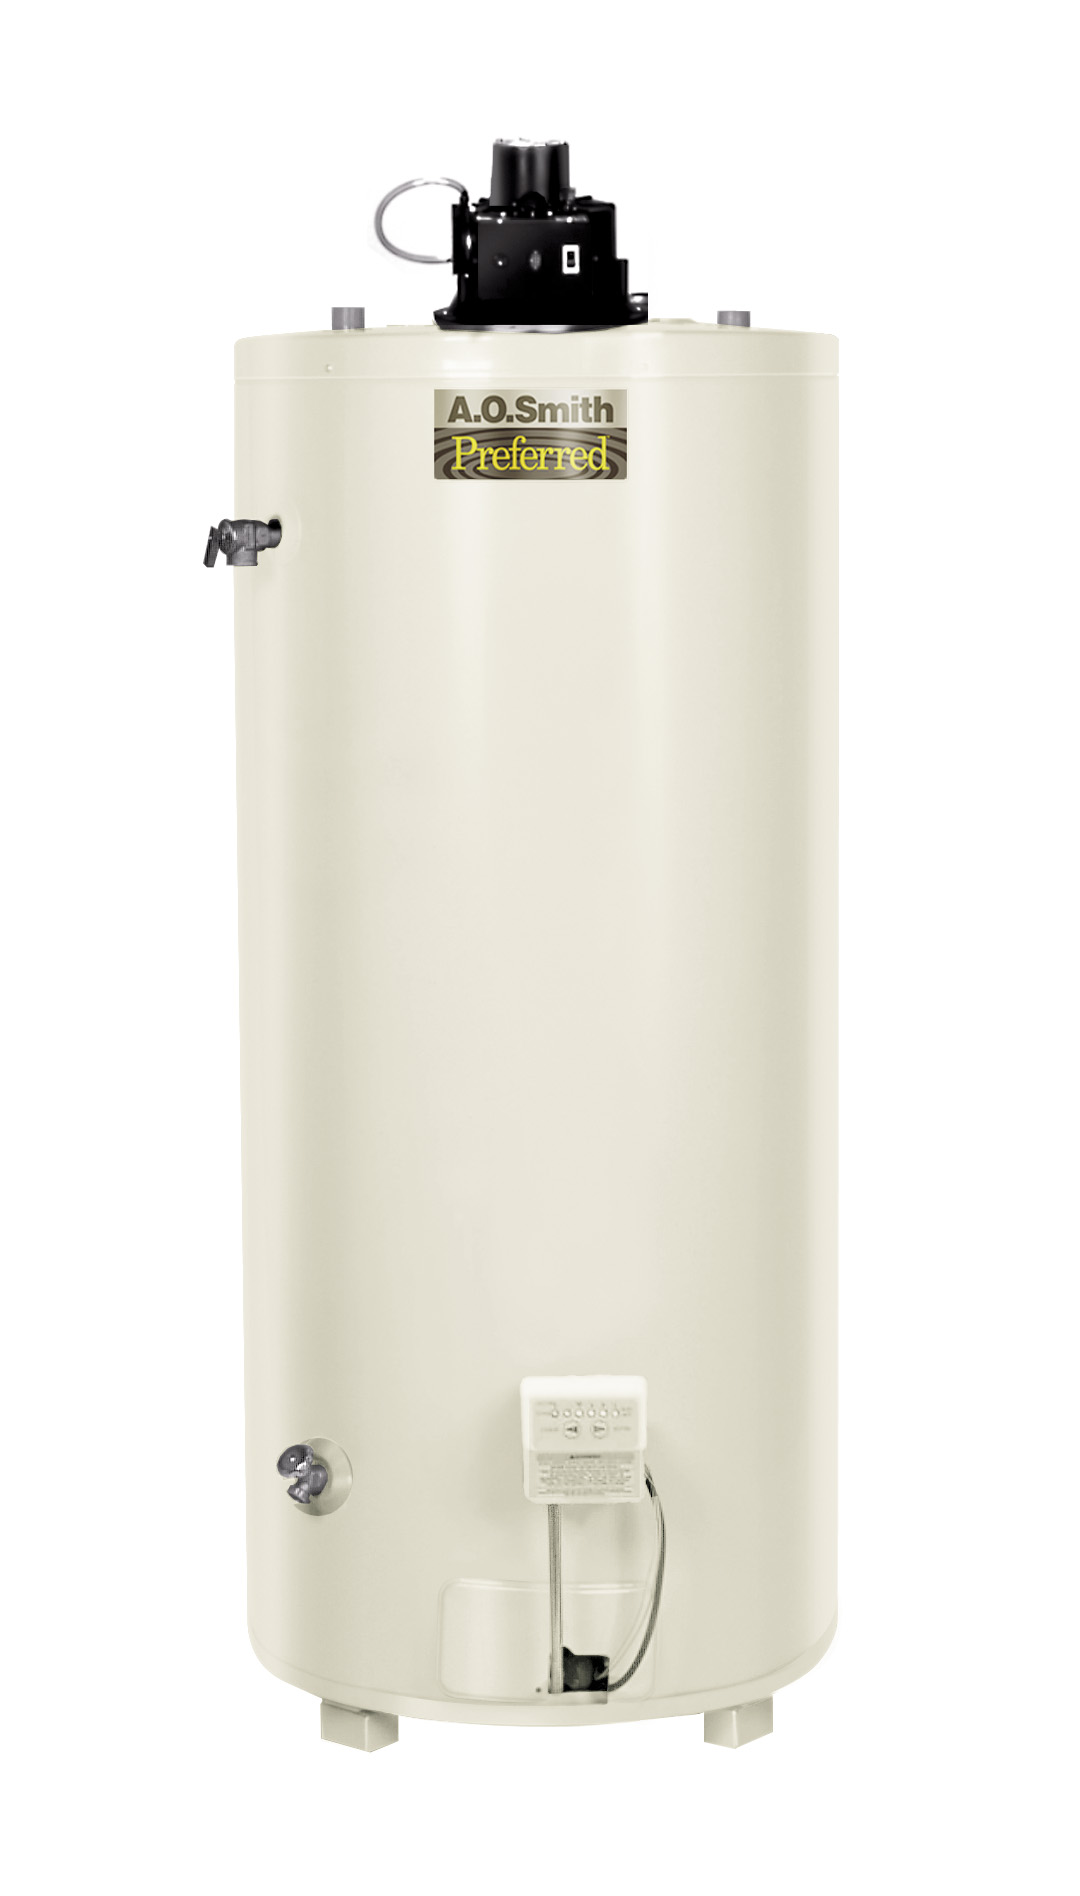 AO SMITH BTF-80: 74 GALLON, 76,500 BTU, 4inch VENT, CONSERVATIONIST POWER VENT SINGLE FLUE, NATURAL GAS COMMERICAL WATER HEATER